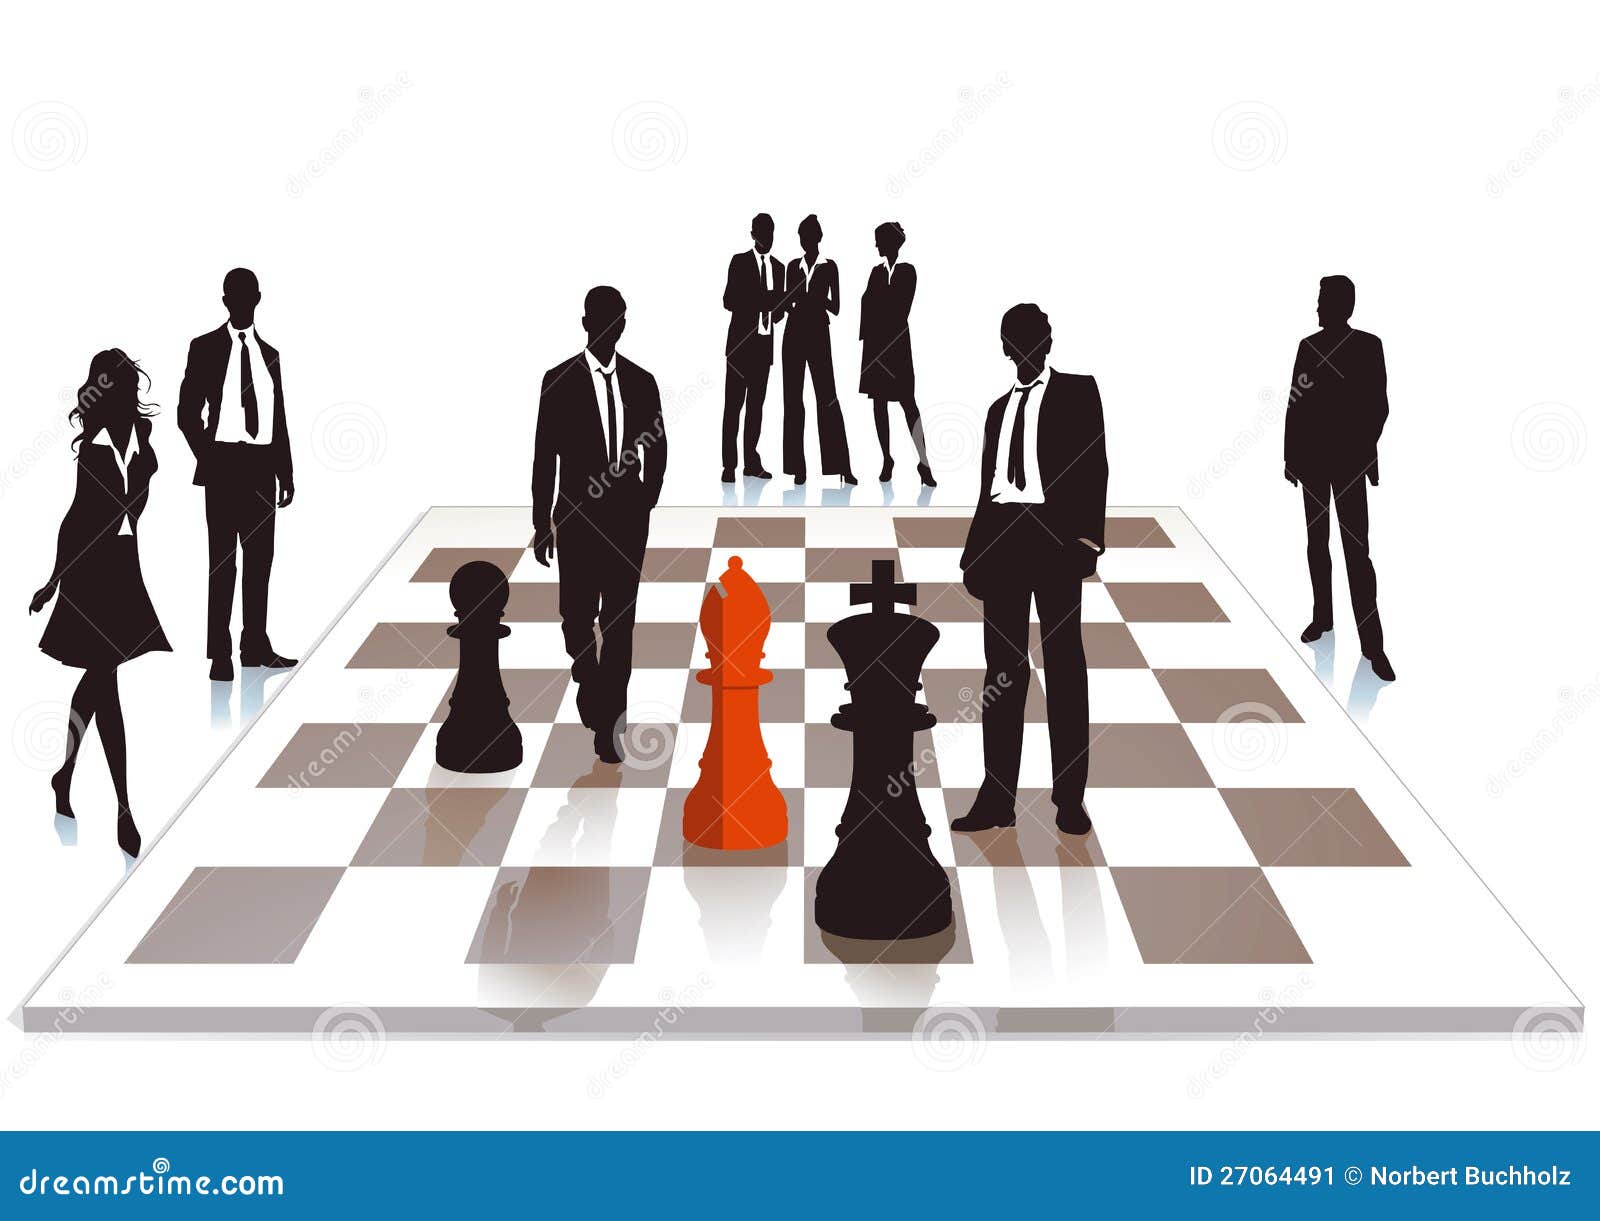 Business Chess Stock Image - Image: 27064491